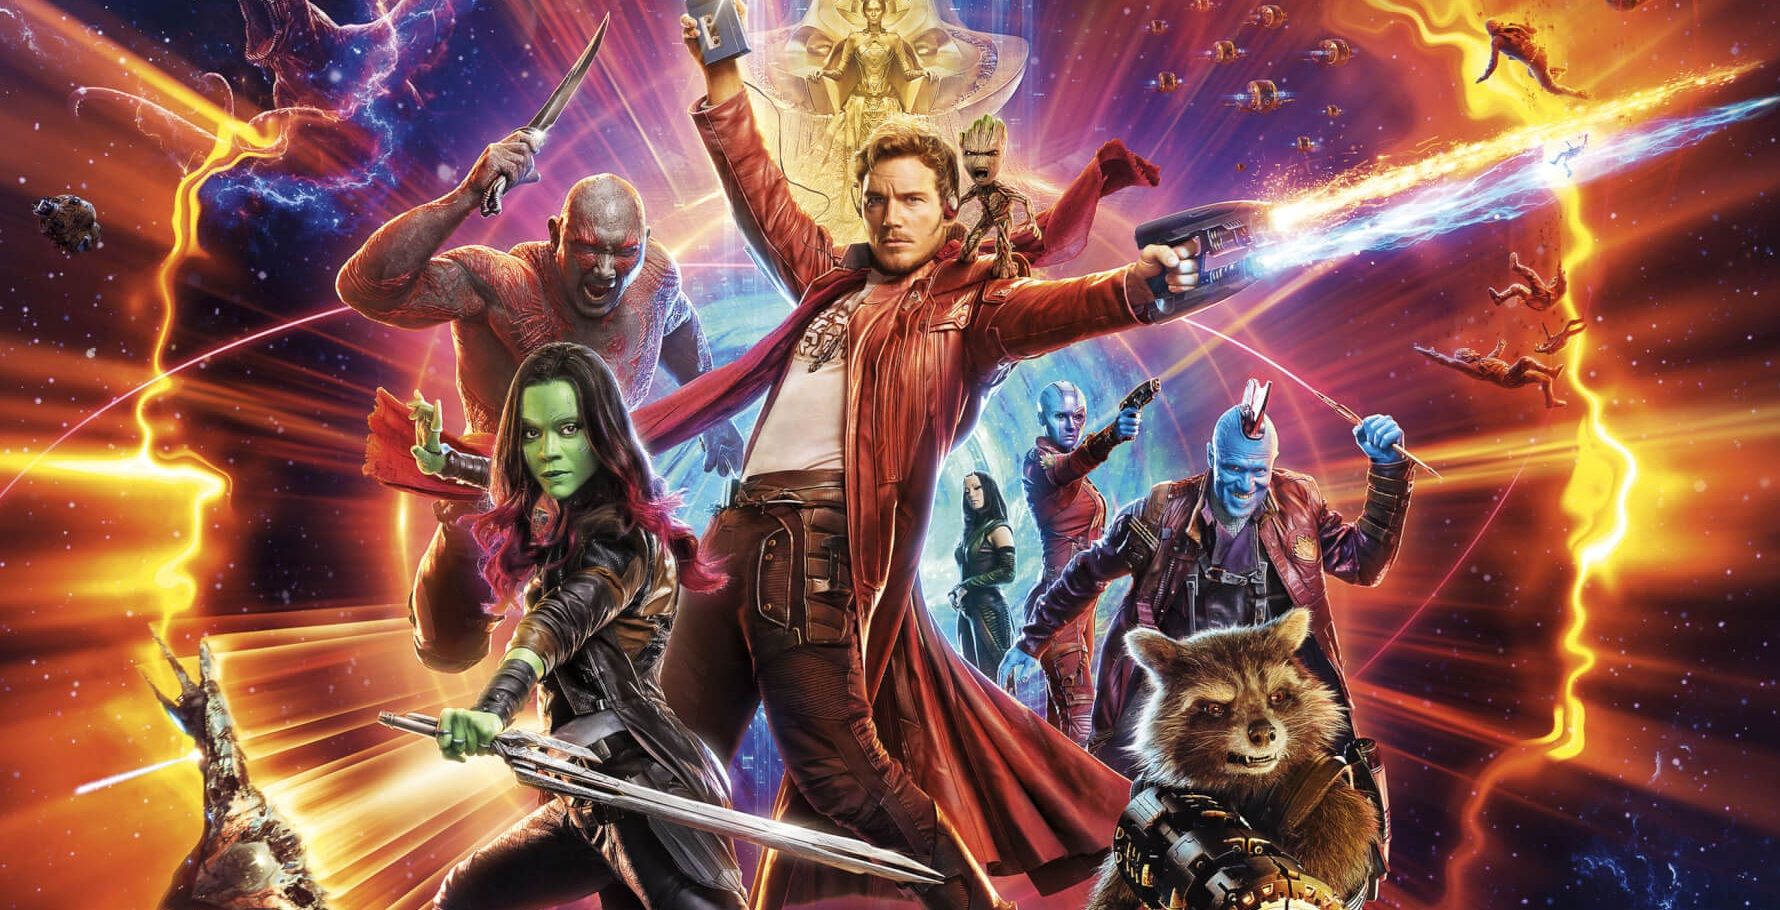 download the new version Guardians of the Galaxy Vol 3